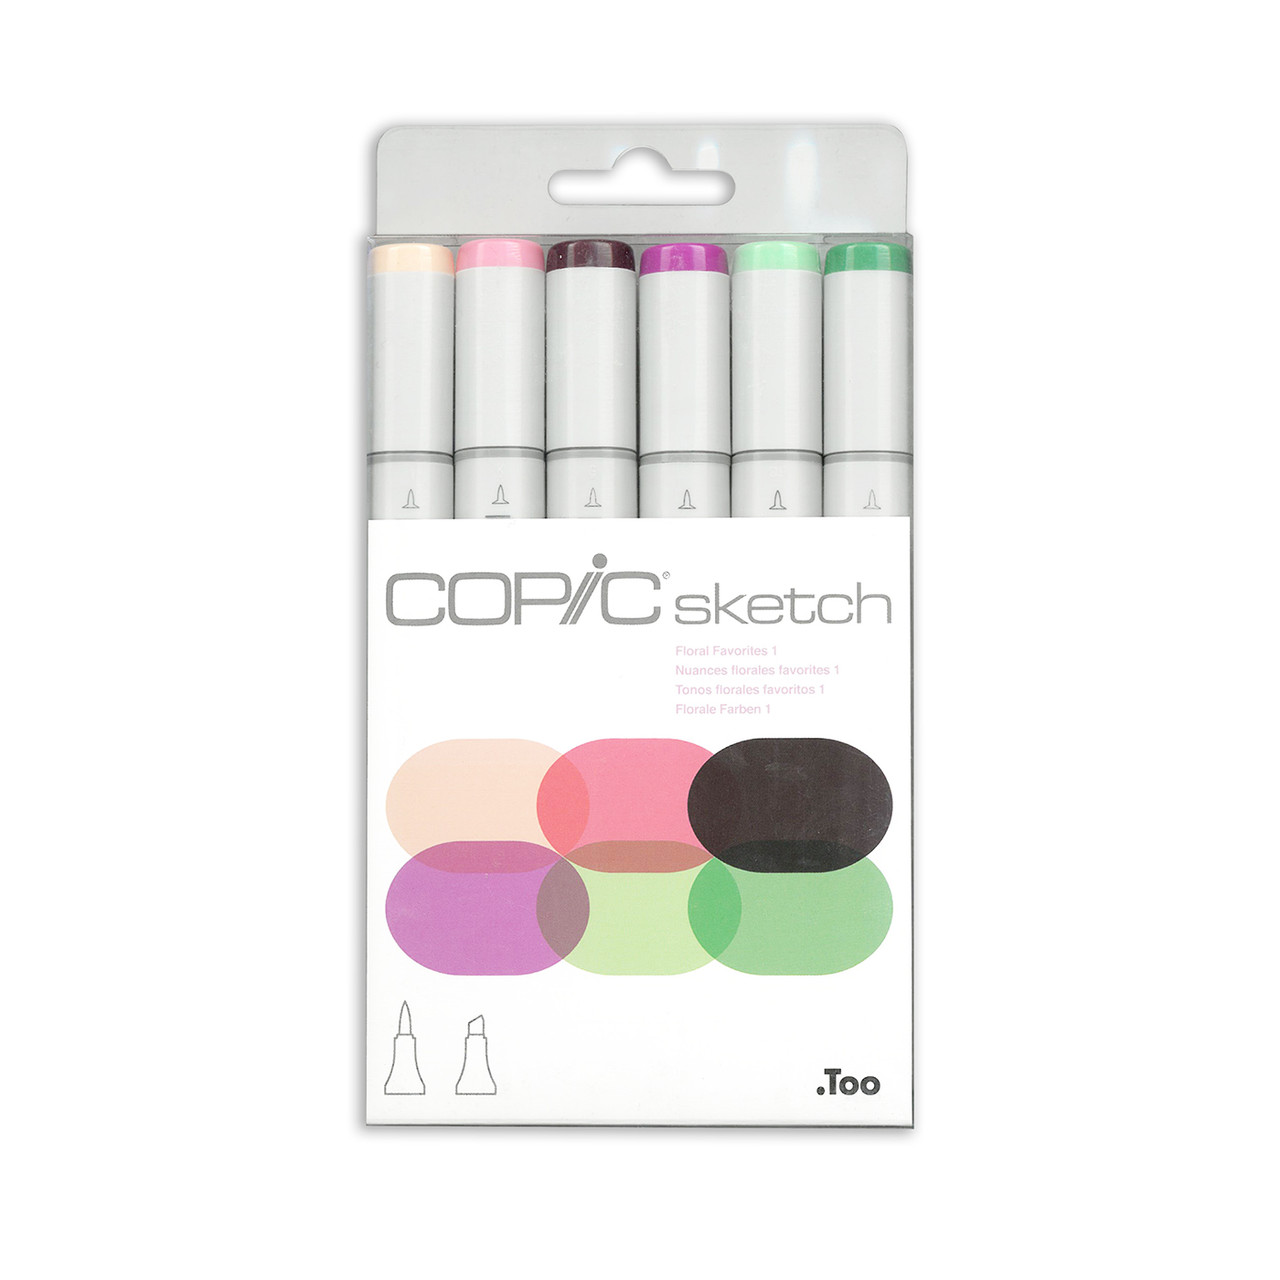 Copic Sketch 6+1 Limited Edition - COPIC Official Website